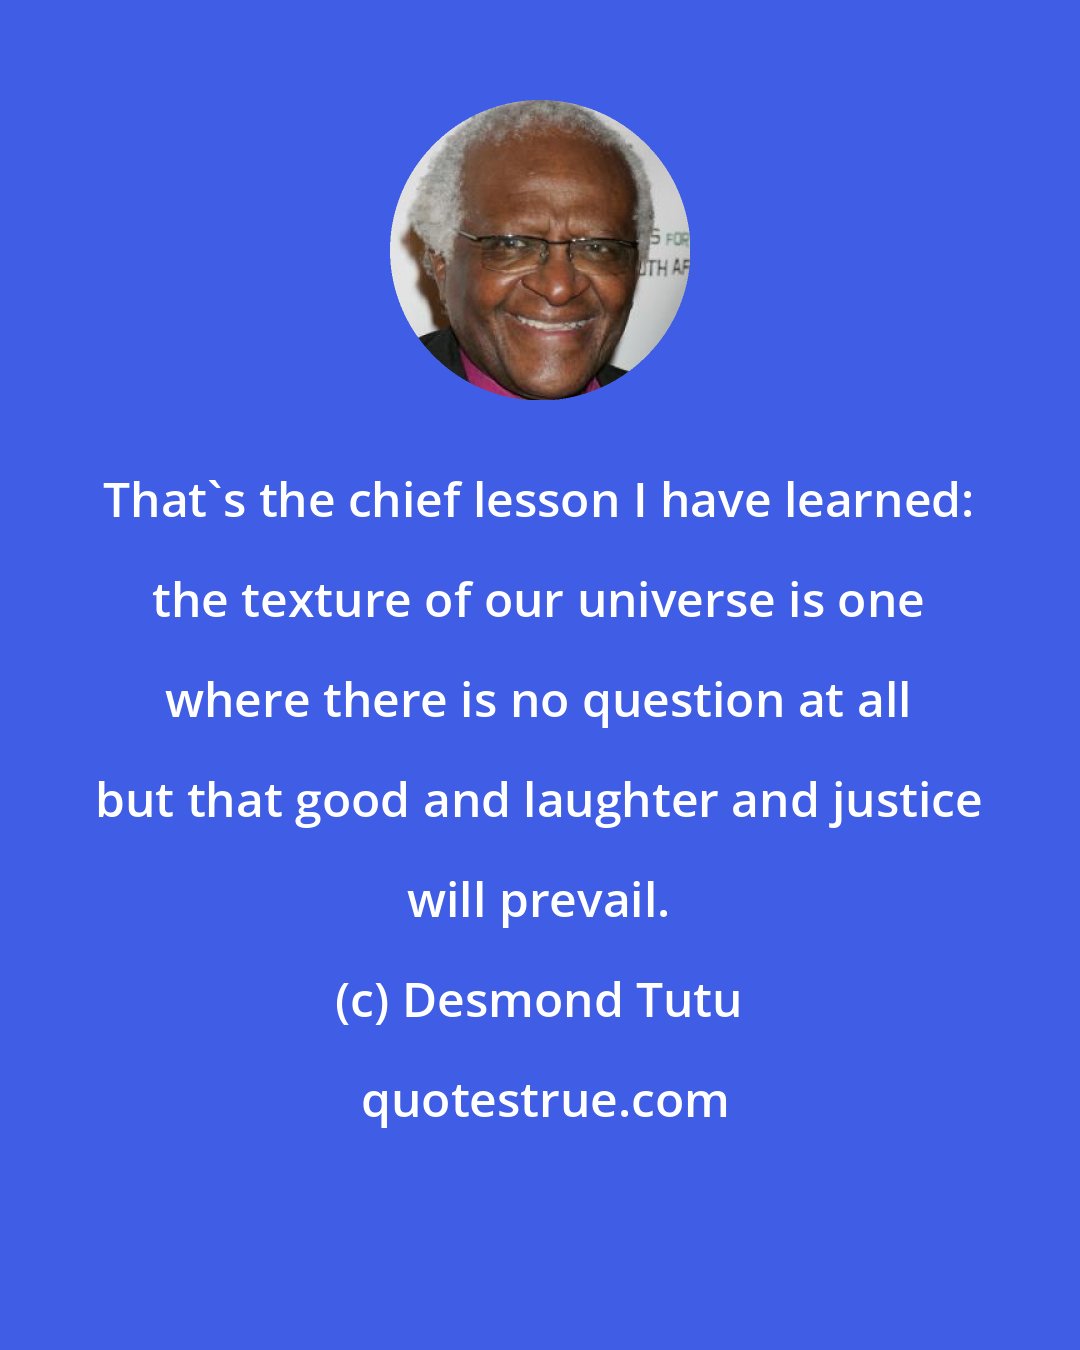 Desmond Tutu: That's the chief lesson I have learned: the texture of our universe is one where there is no question at all but that good and laughter and justice will prevail.